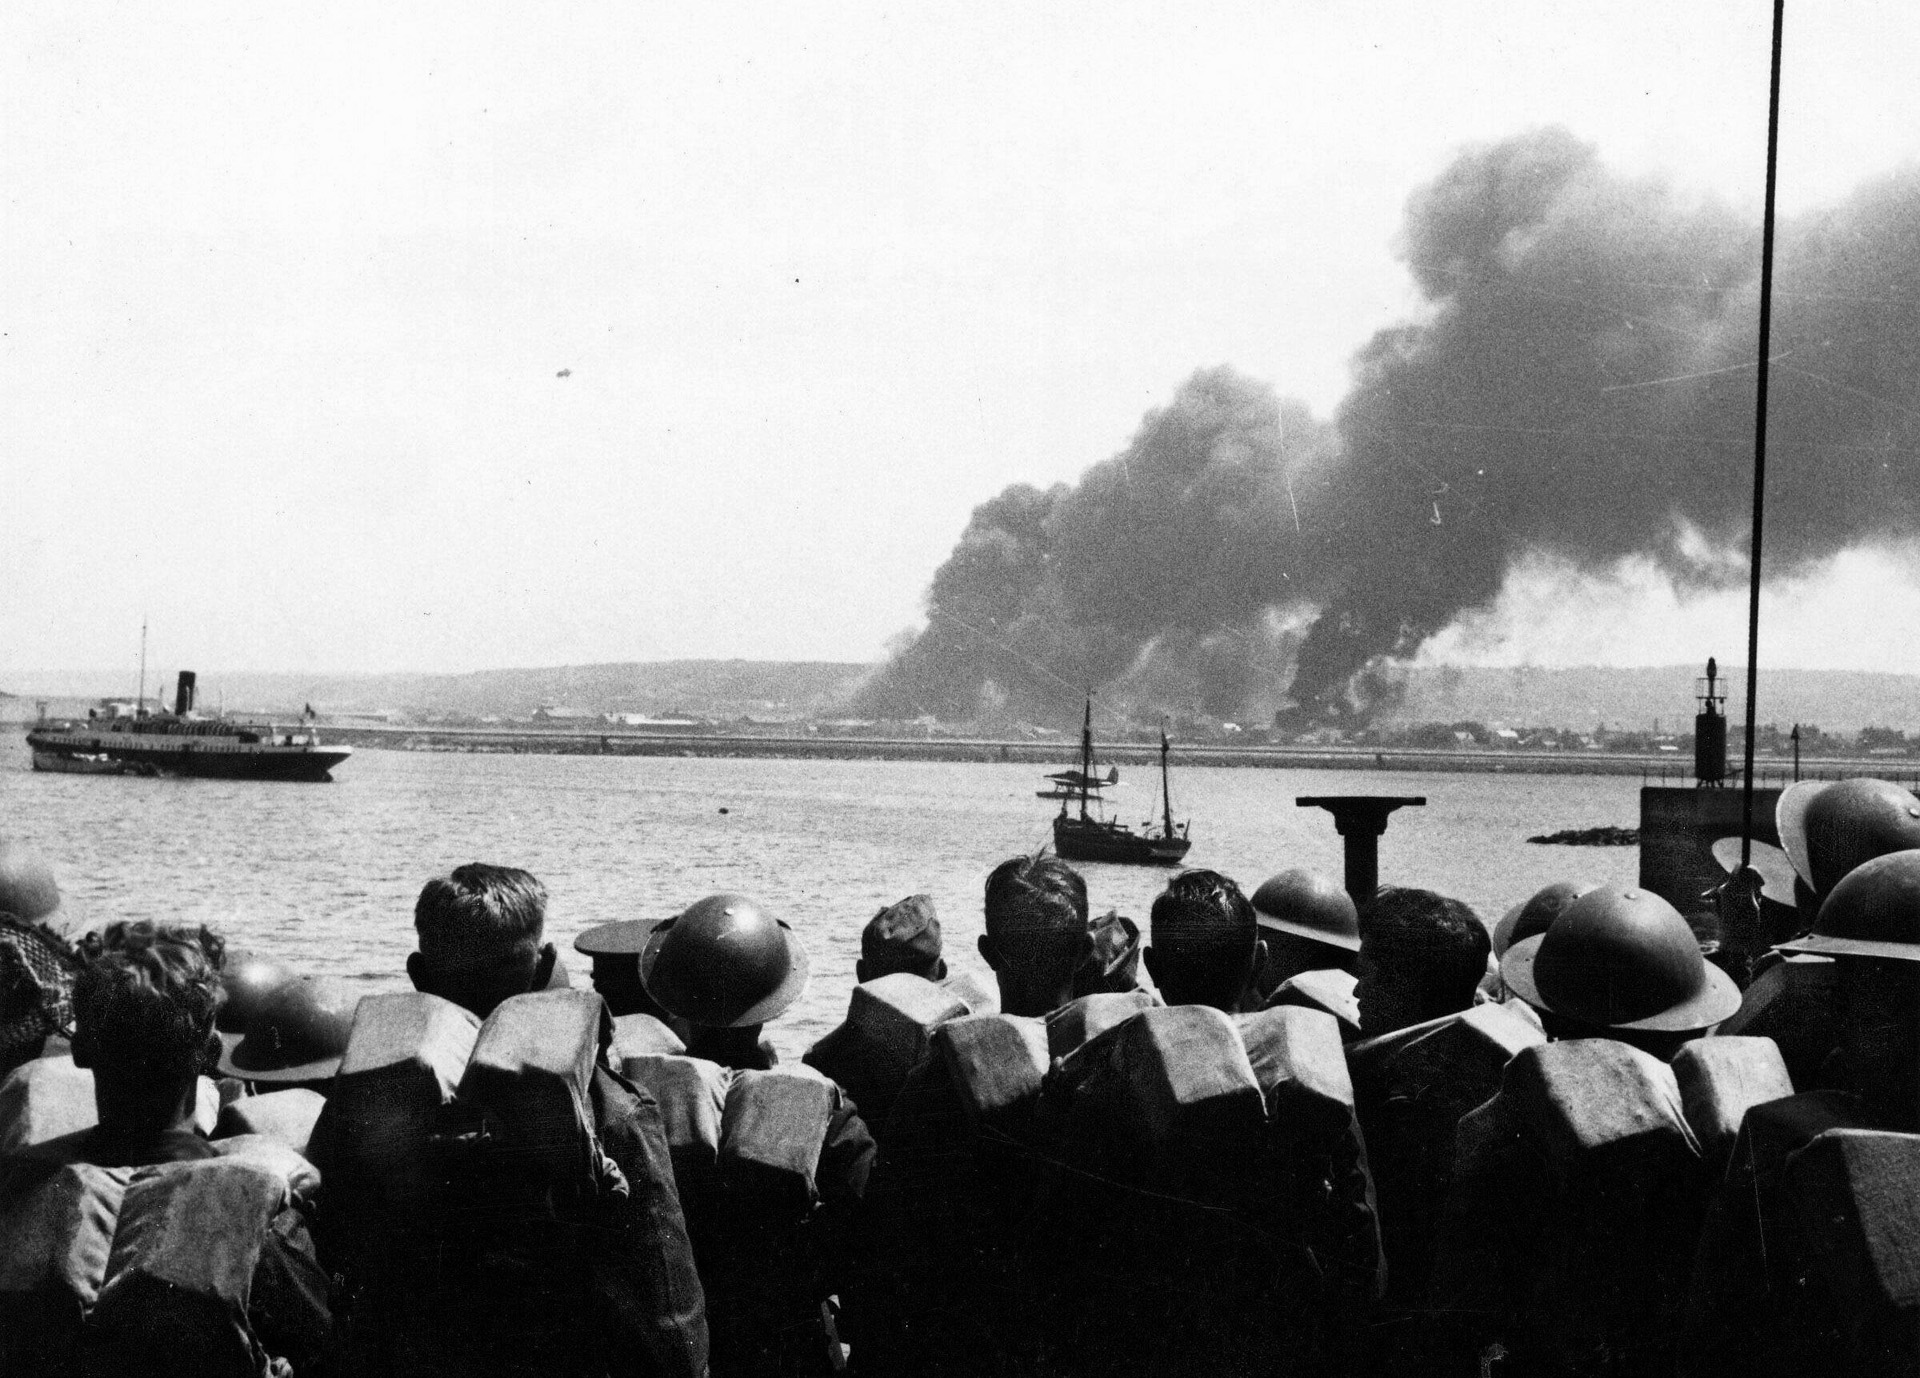 Evacuated British soldiers aboard the ship SS Nomadic watch warehouses burn in the French port city of Cherbourg in this photo taken in June 1940 at the height of Operation Dynamo.